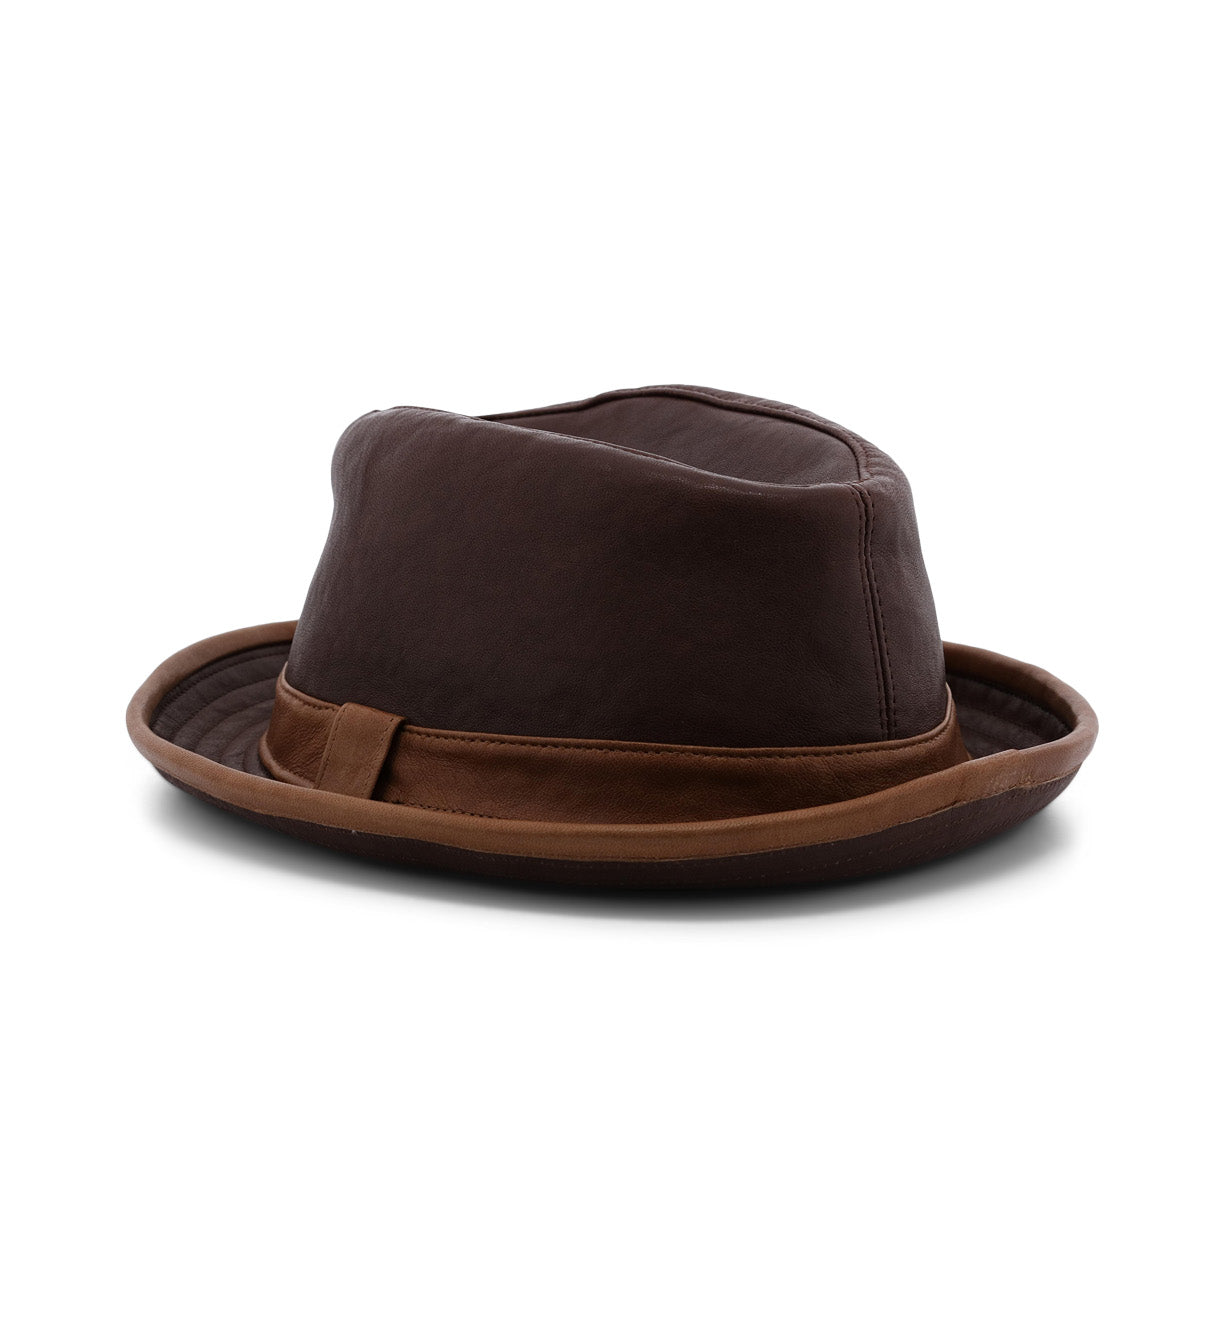 A Turino fedora by Bed Stu, in brown and tan, on a white background.